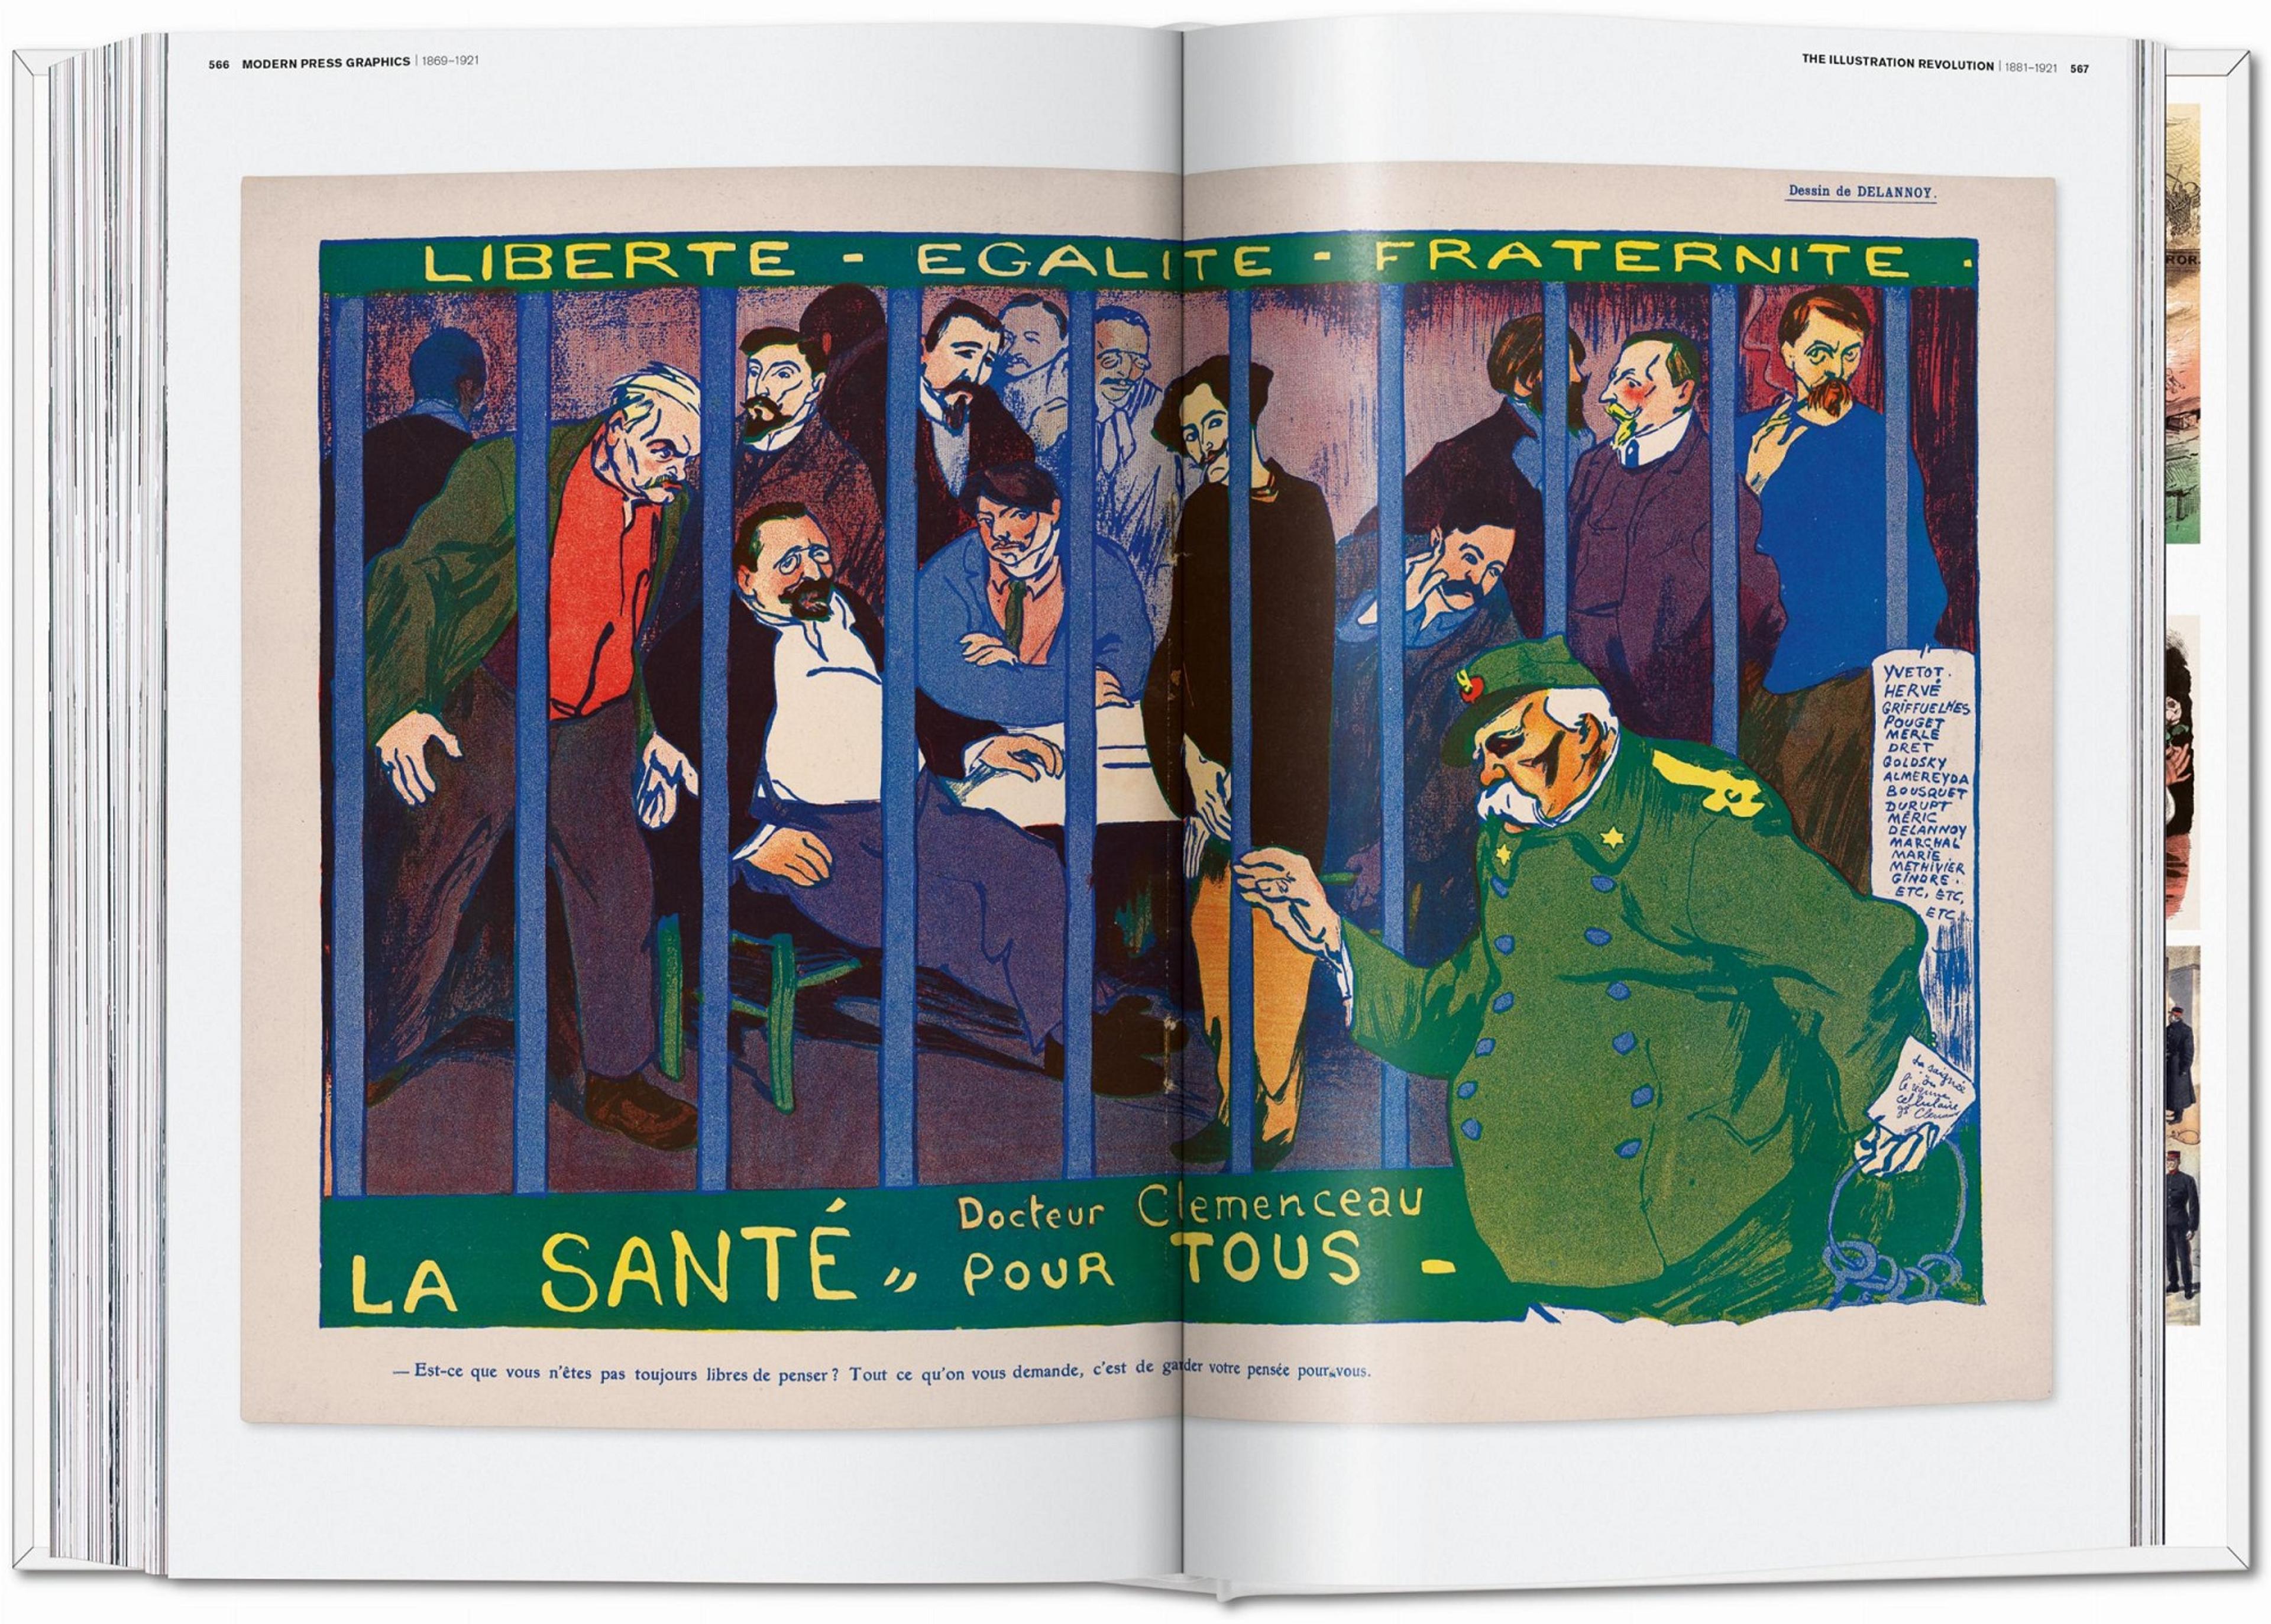 Photograph of an open book showing an illustration of people in prison